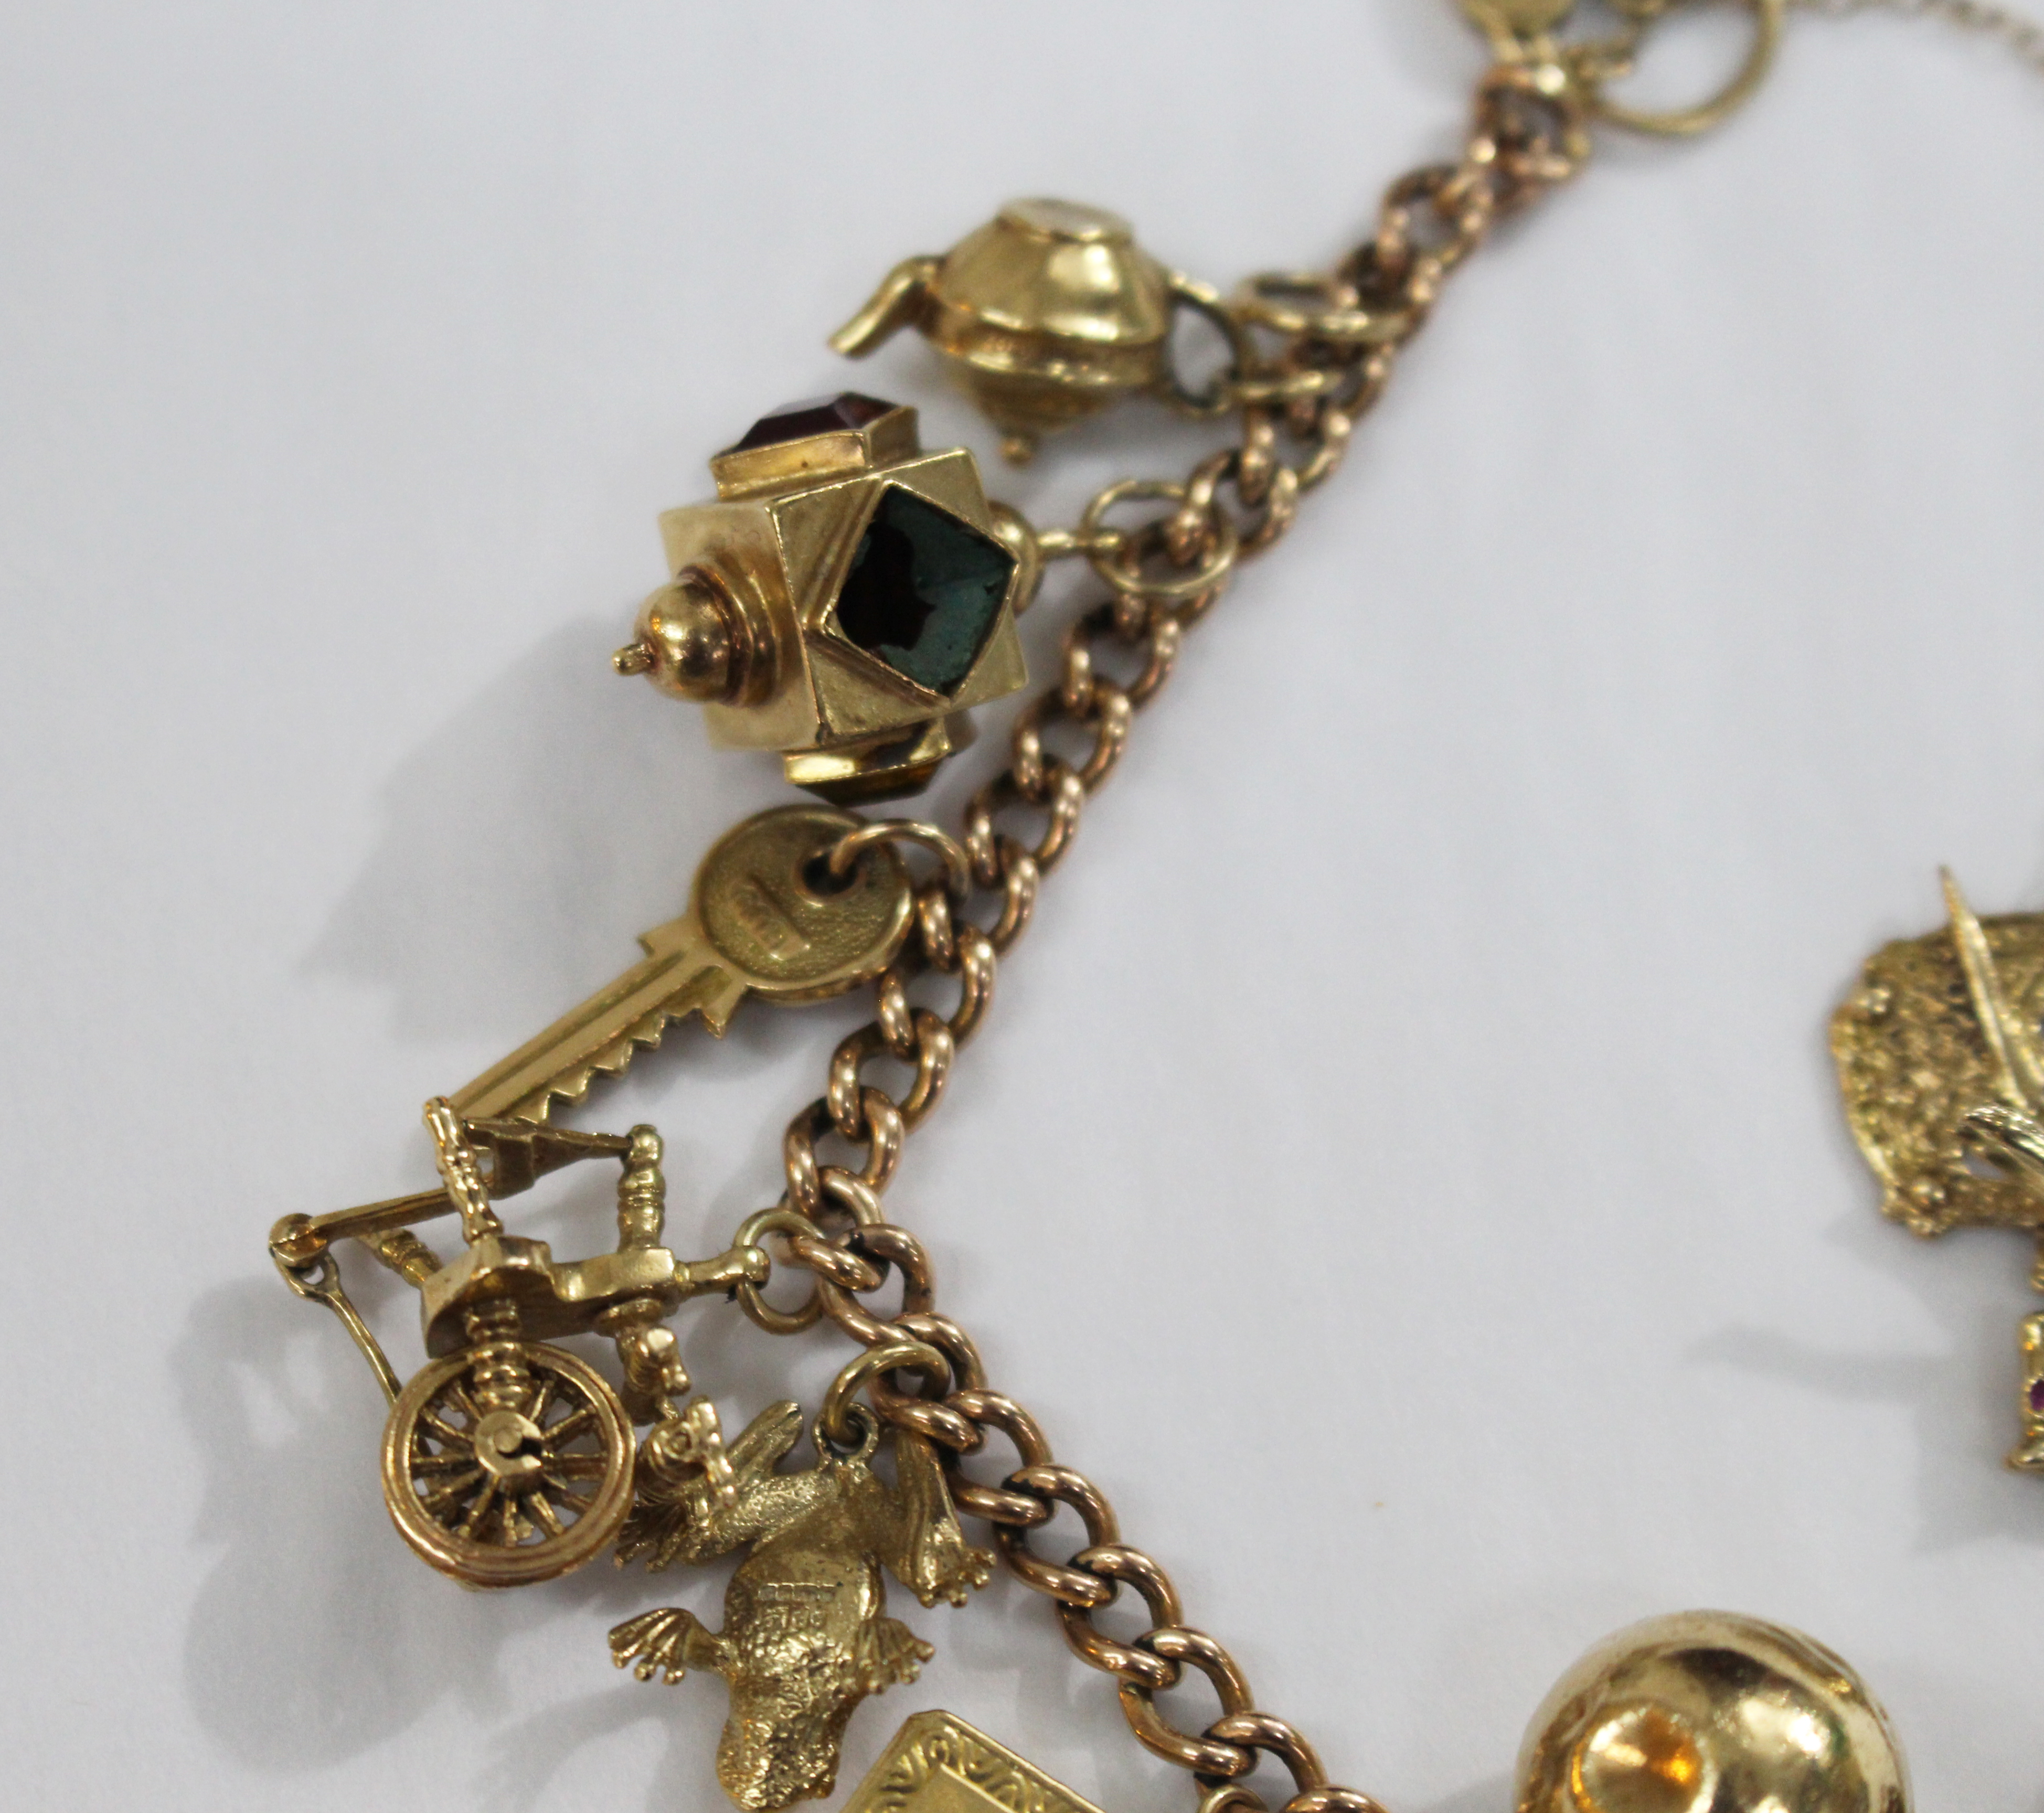 9ct Gold Vintage Charm Bracelet with 14 Charms - Image 9 of 10